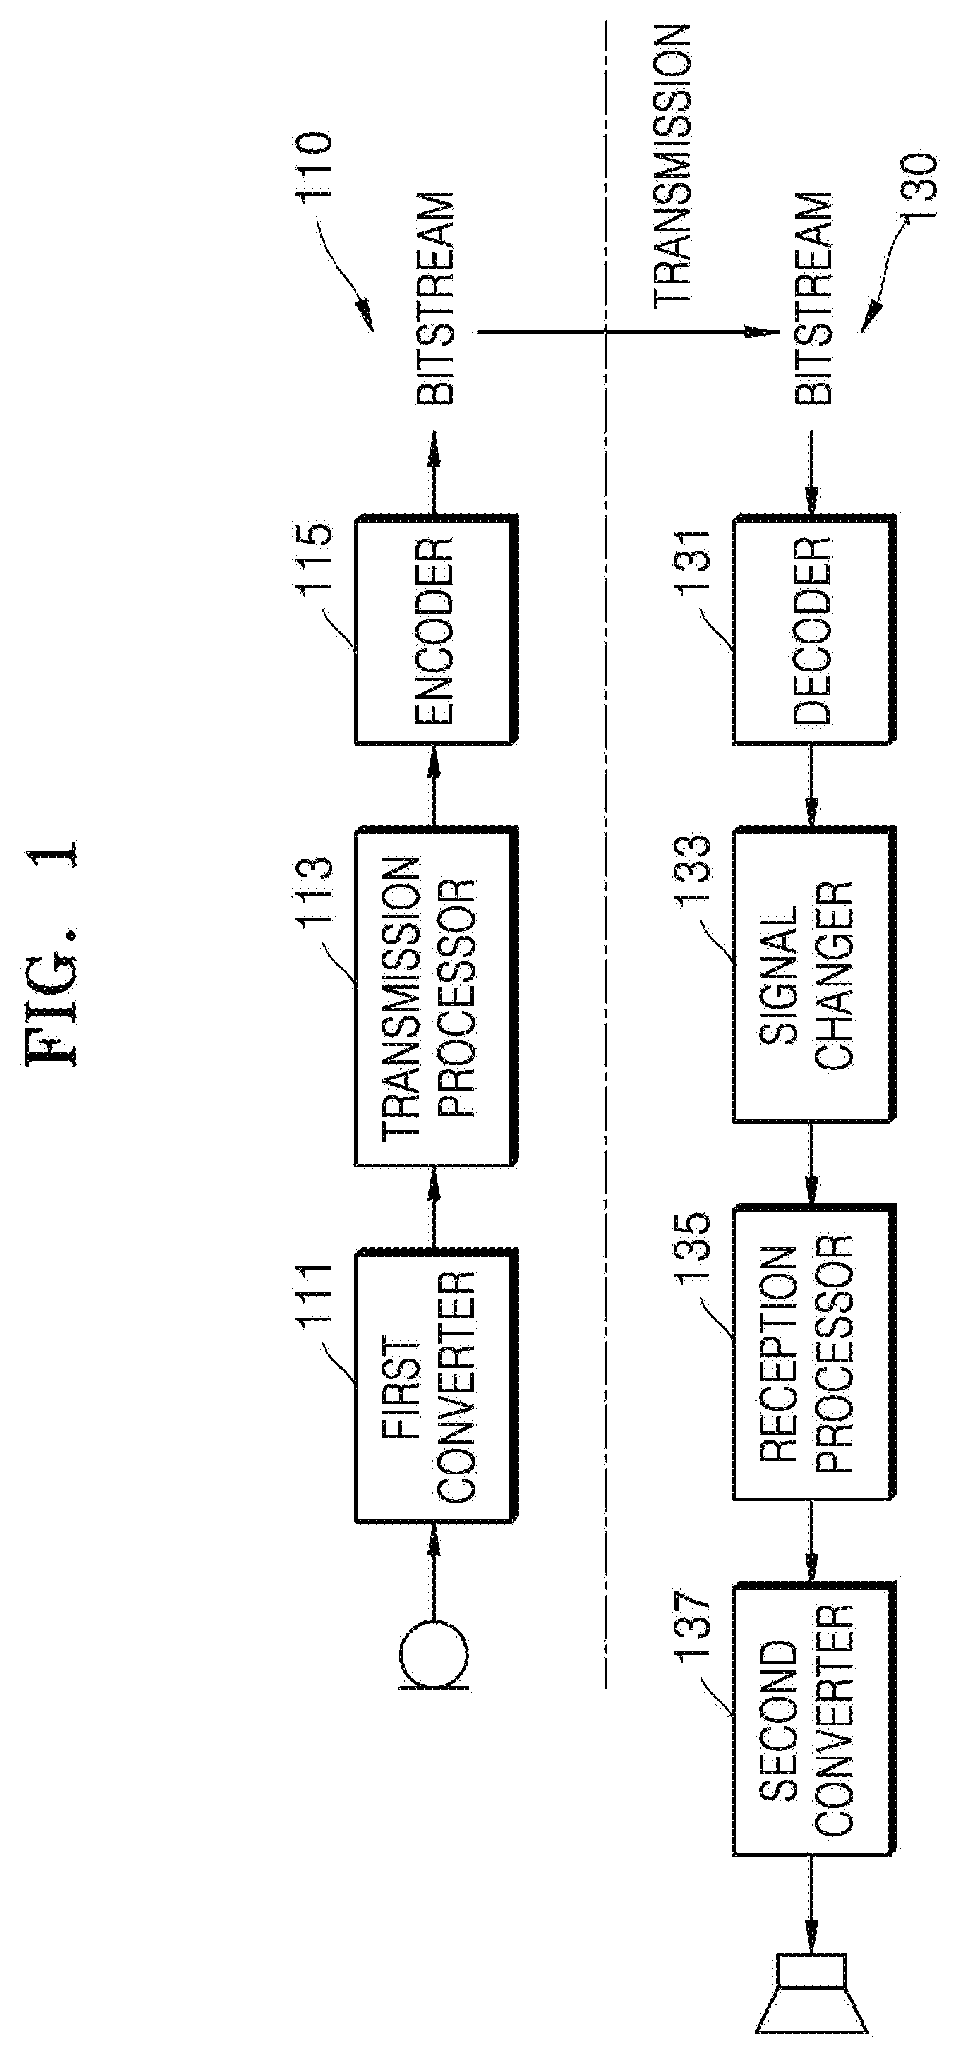 Method and apparatus for improving call quality in noise environment